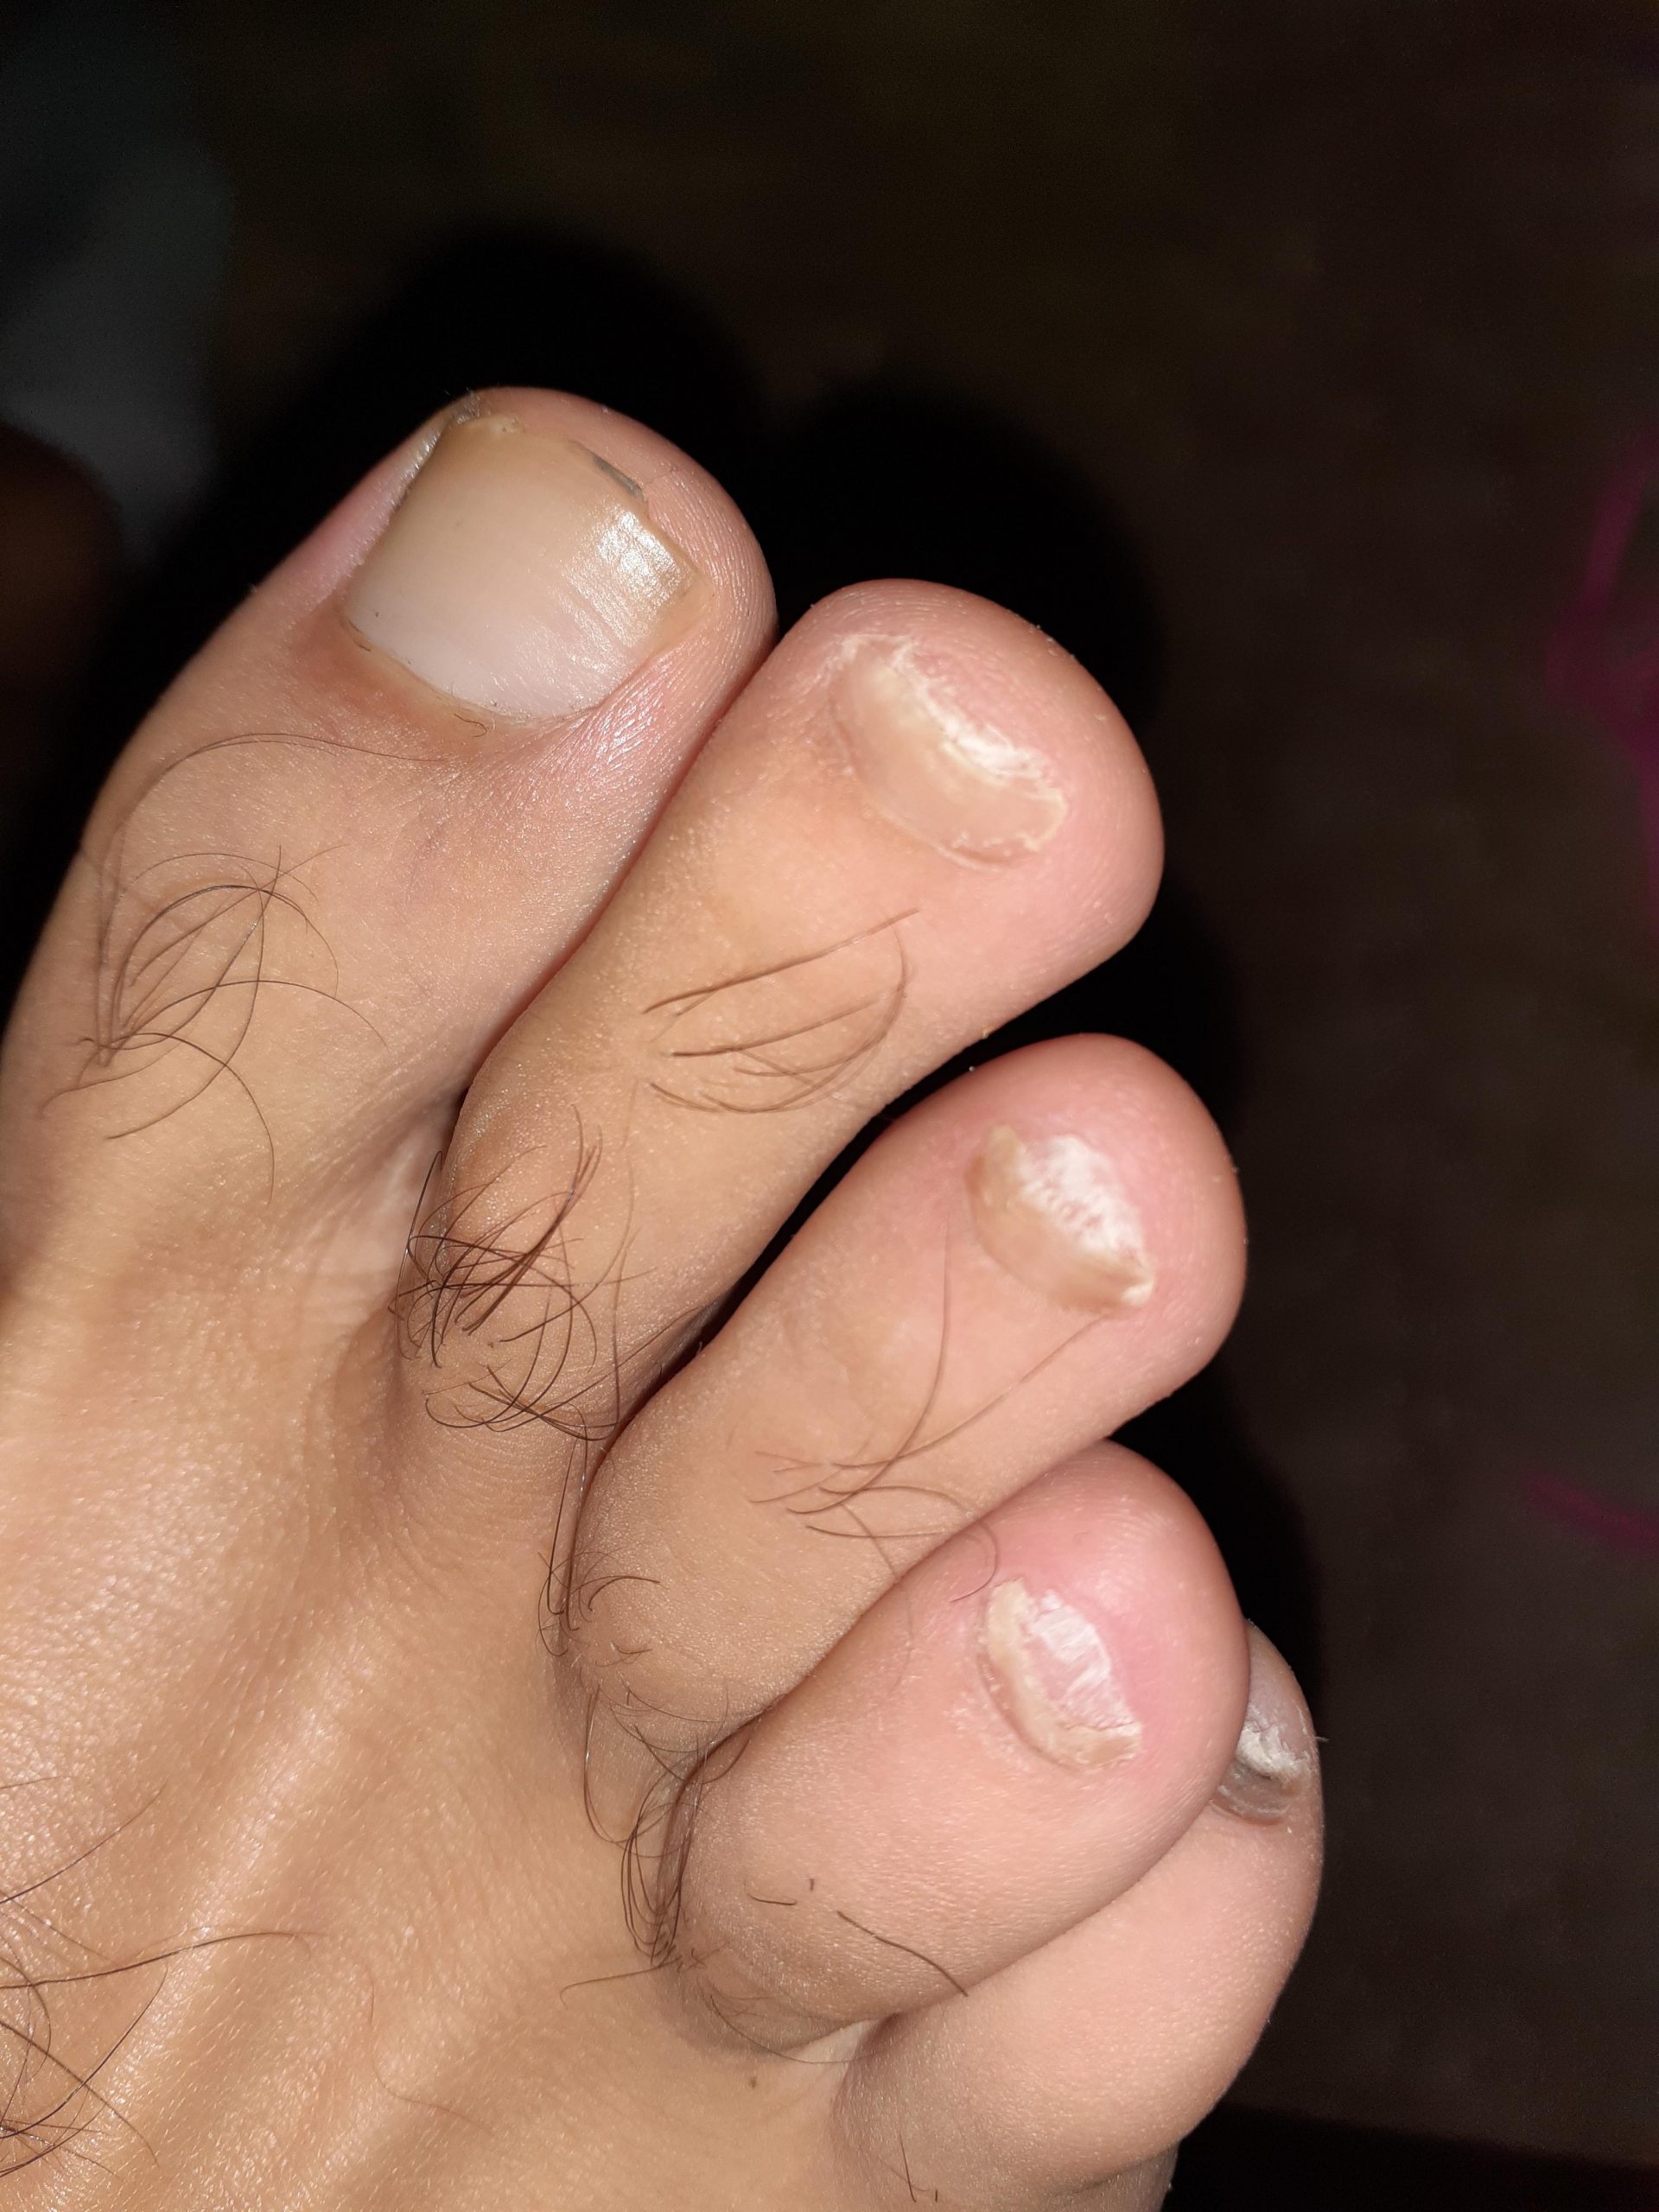 So once we remove the effected toenails....how do i keep ...